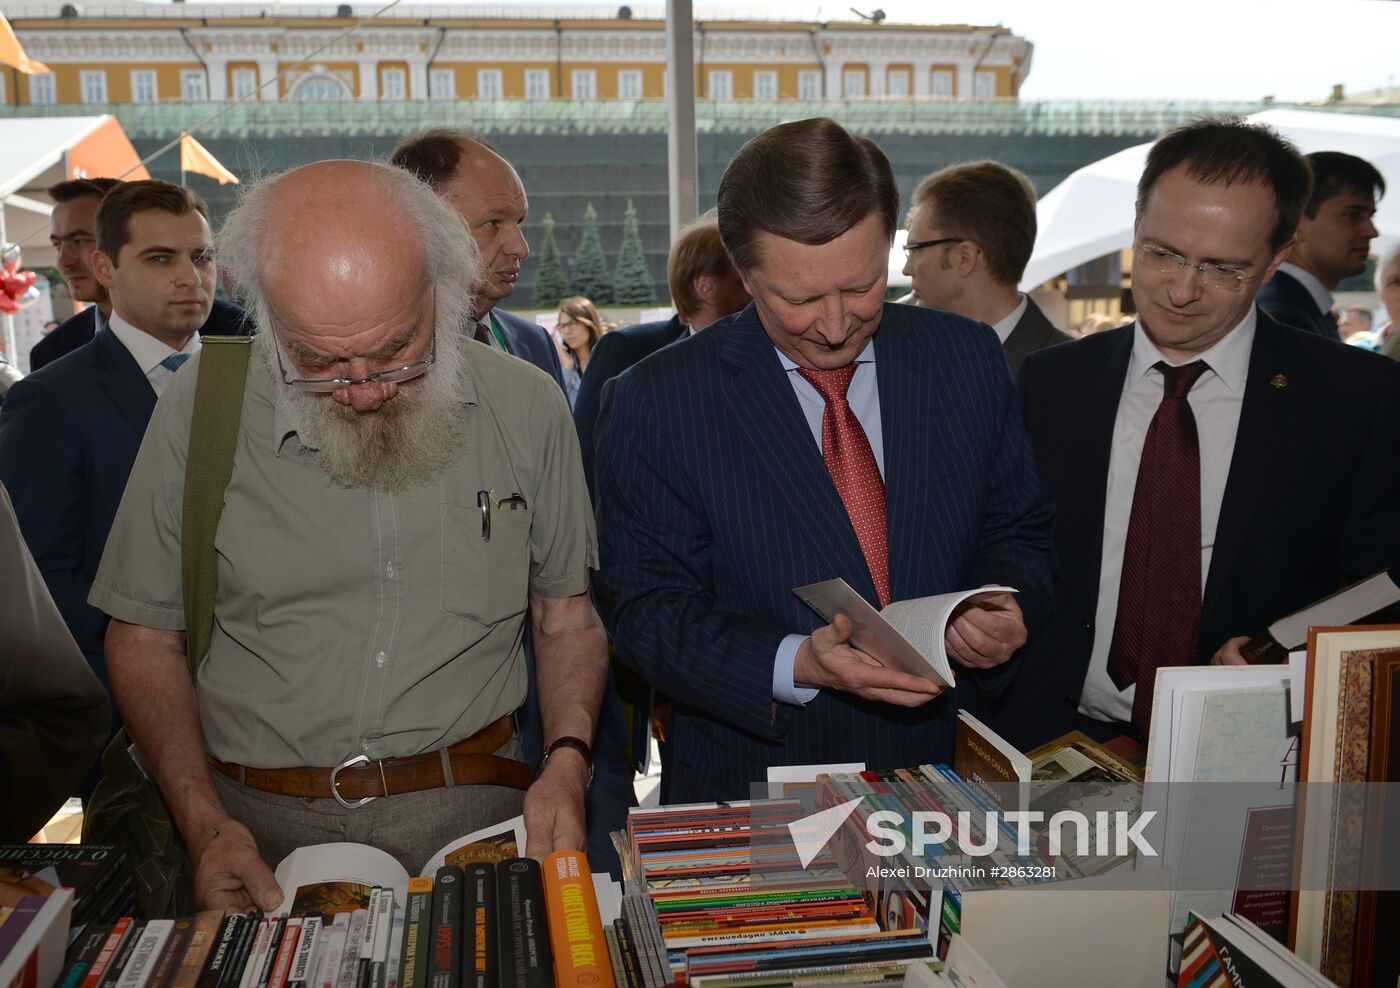 Books of Russia 2016 Fstival on Red Square